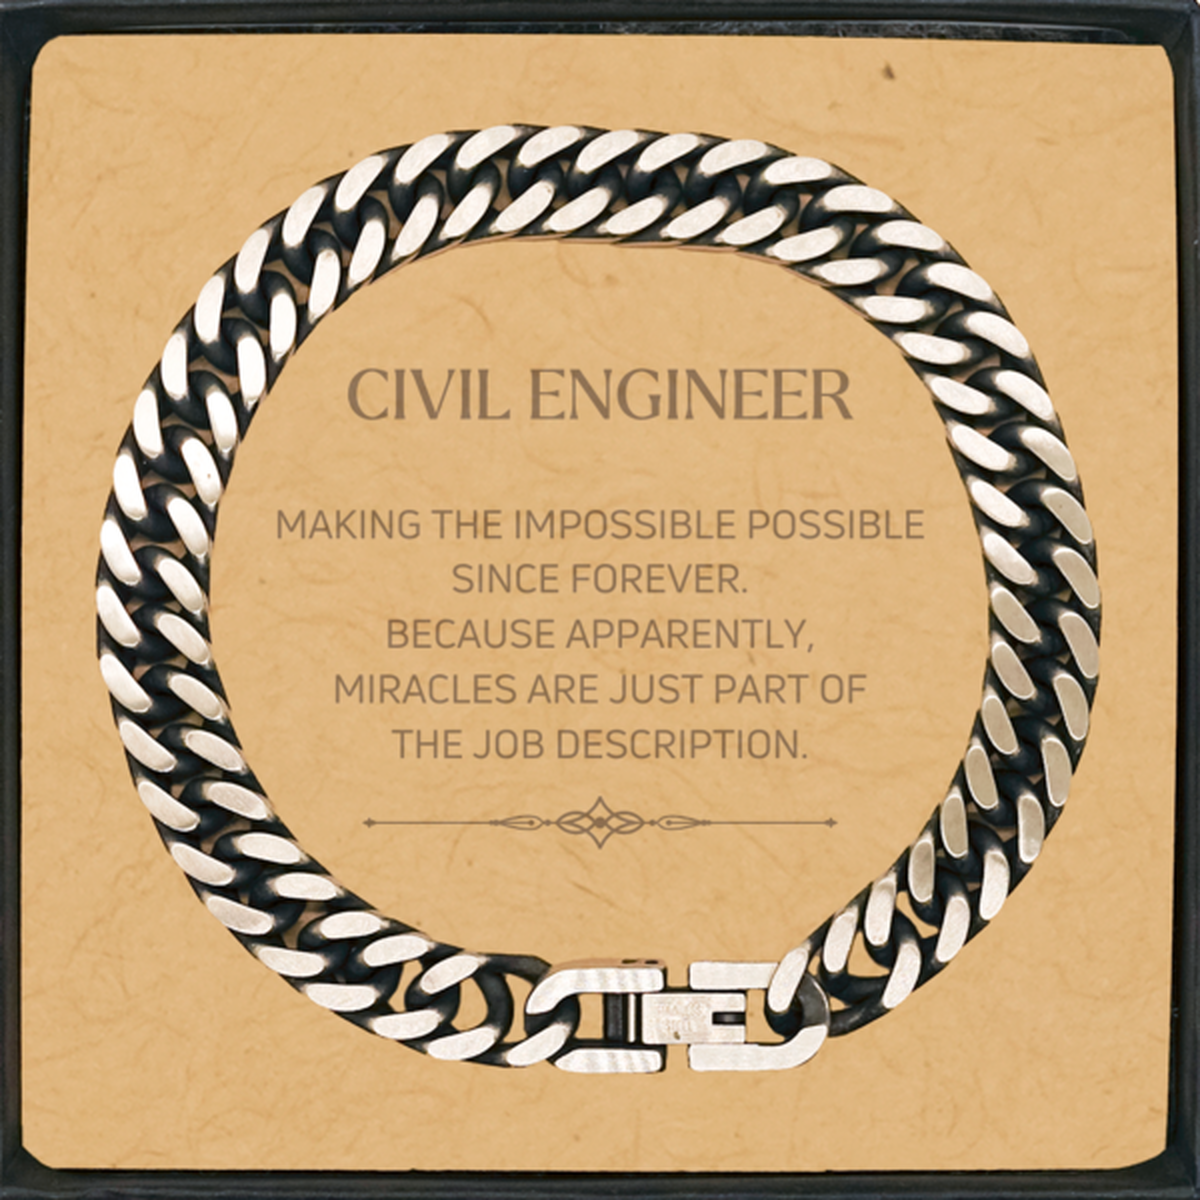 Funny Civil Engineer Gifts, Miracles are just part of the job description, Inspirational Birthday Cuban Link Chain Bracelet For Civil Engineer, Men, Women, Coworkers, Friends, Boss